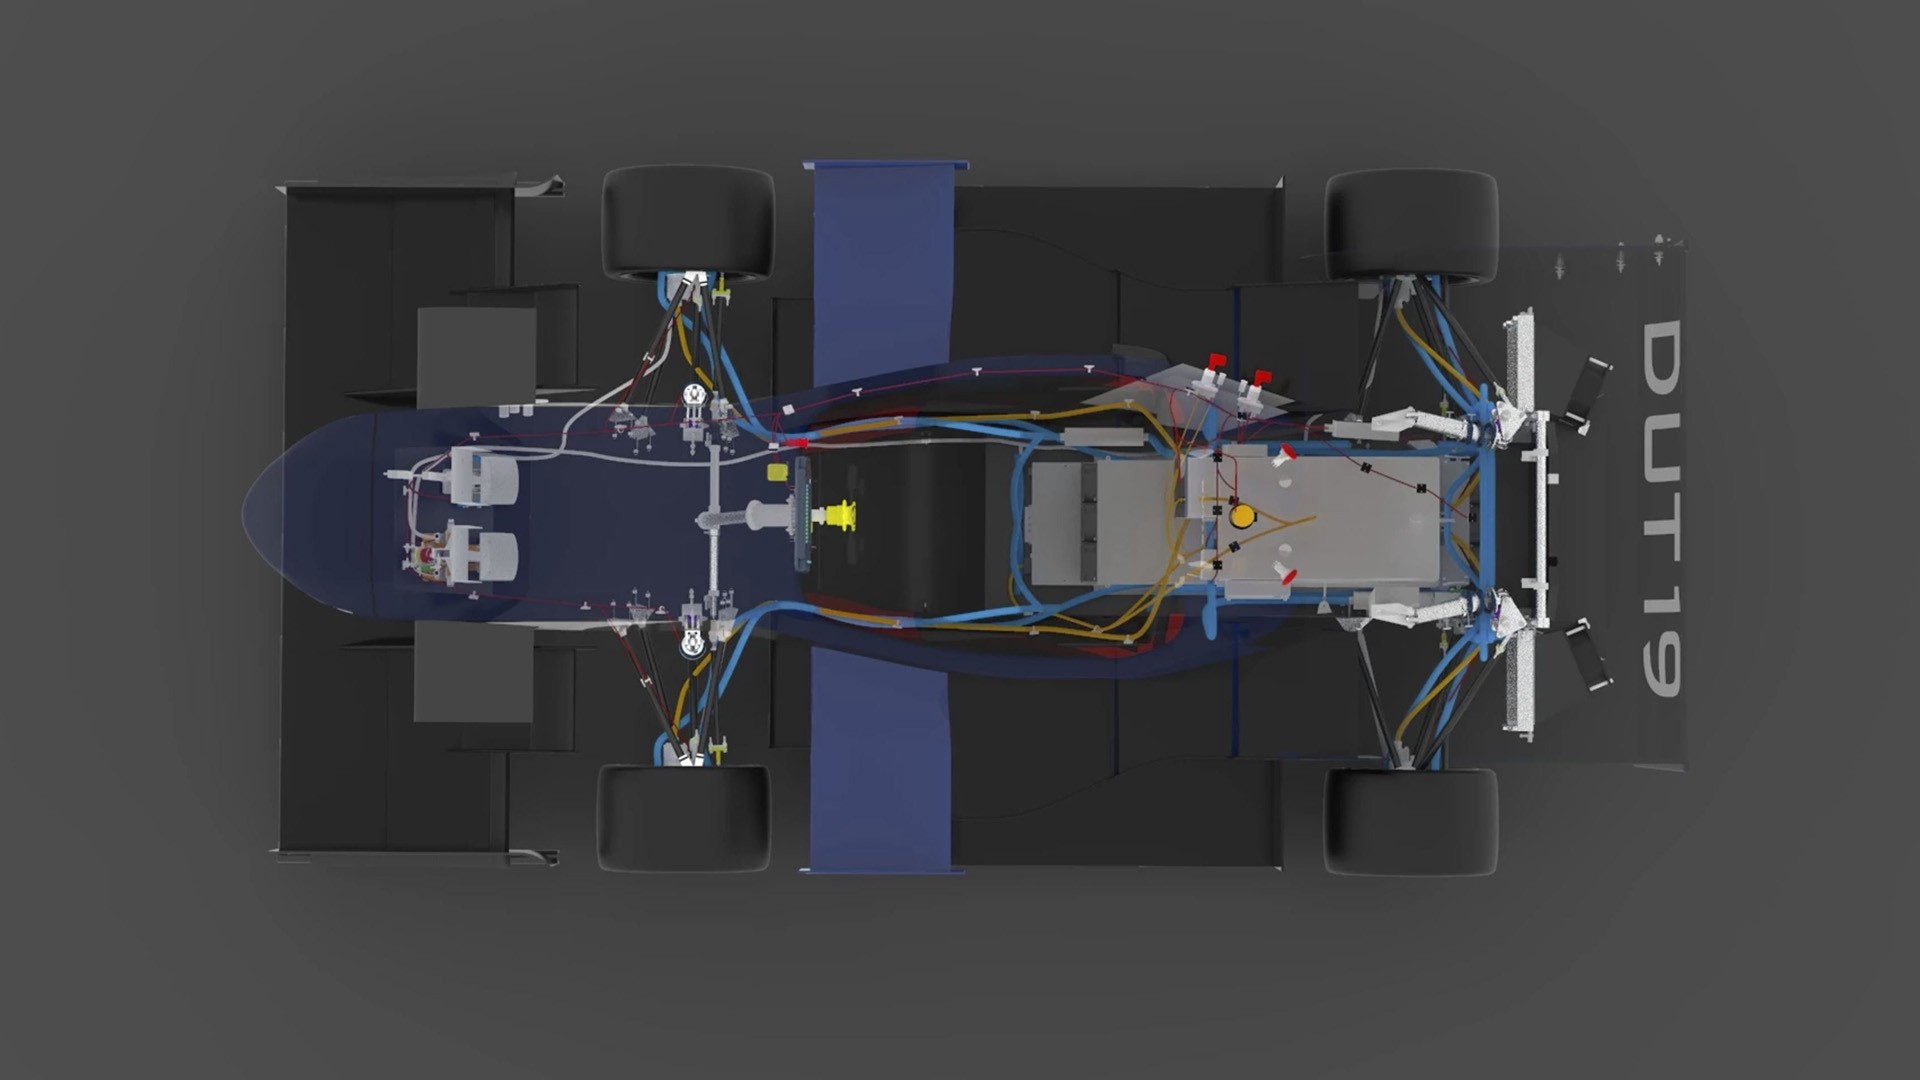 The electric wire plan for a Formula-style car developed by TU Delft